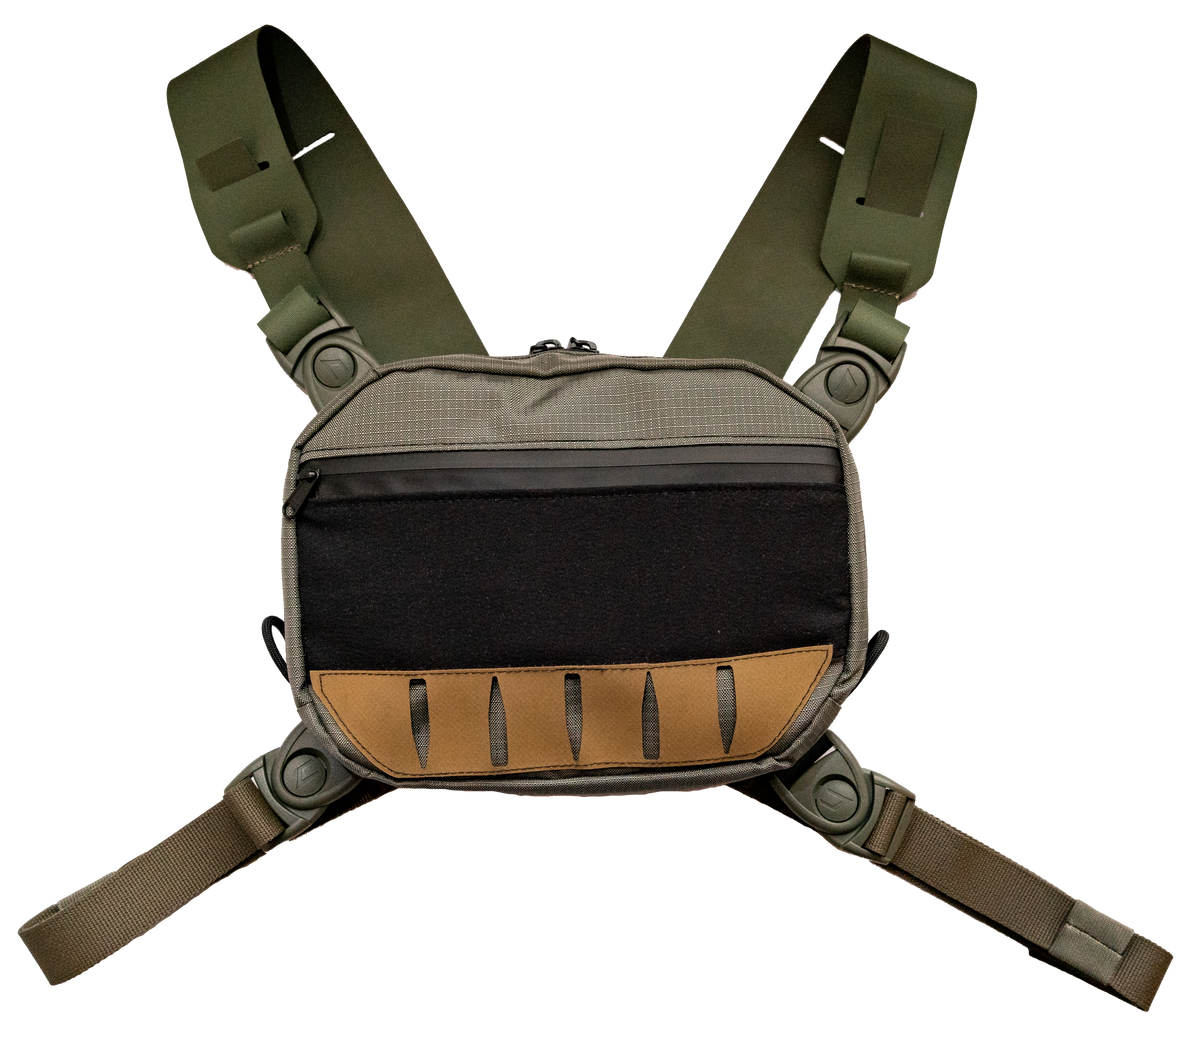 Chest Rig Setup for Fly Fishing - Norden Outdoors